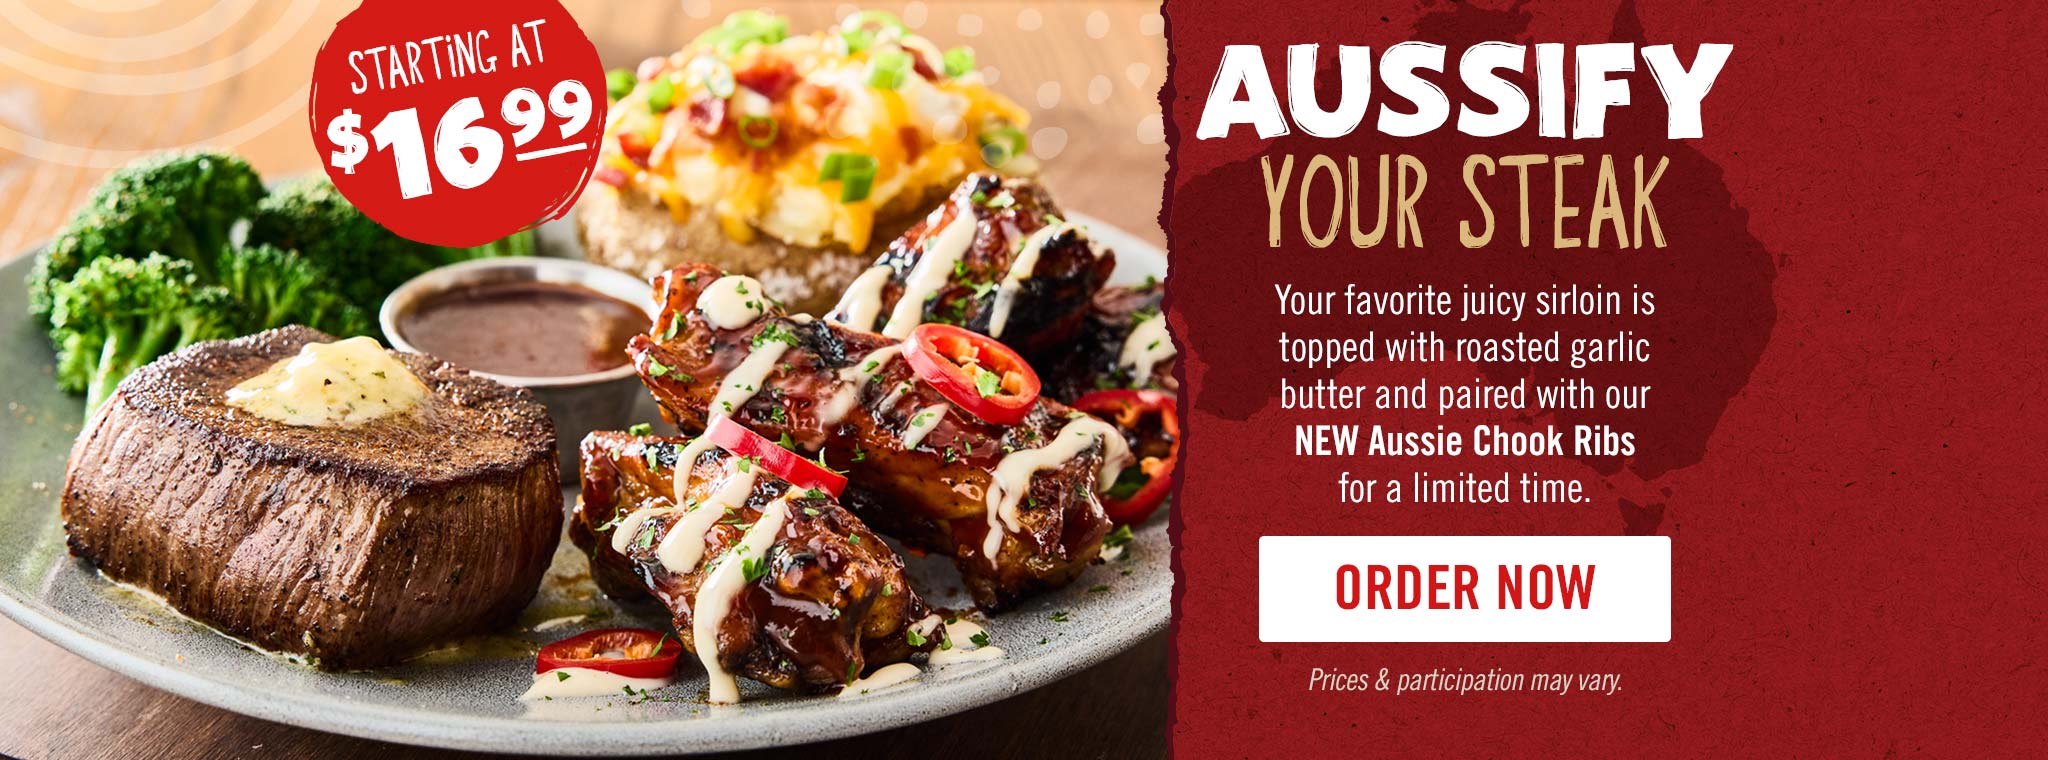 Aussify your steak starting at just $16.99. Your favorite juicy sirloin is topped with roasted garlic butter and paired with our NEW Aussie Chook Ribsfor a limited time.